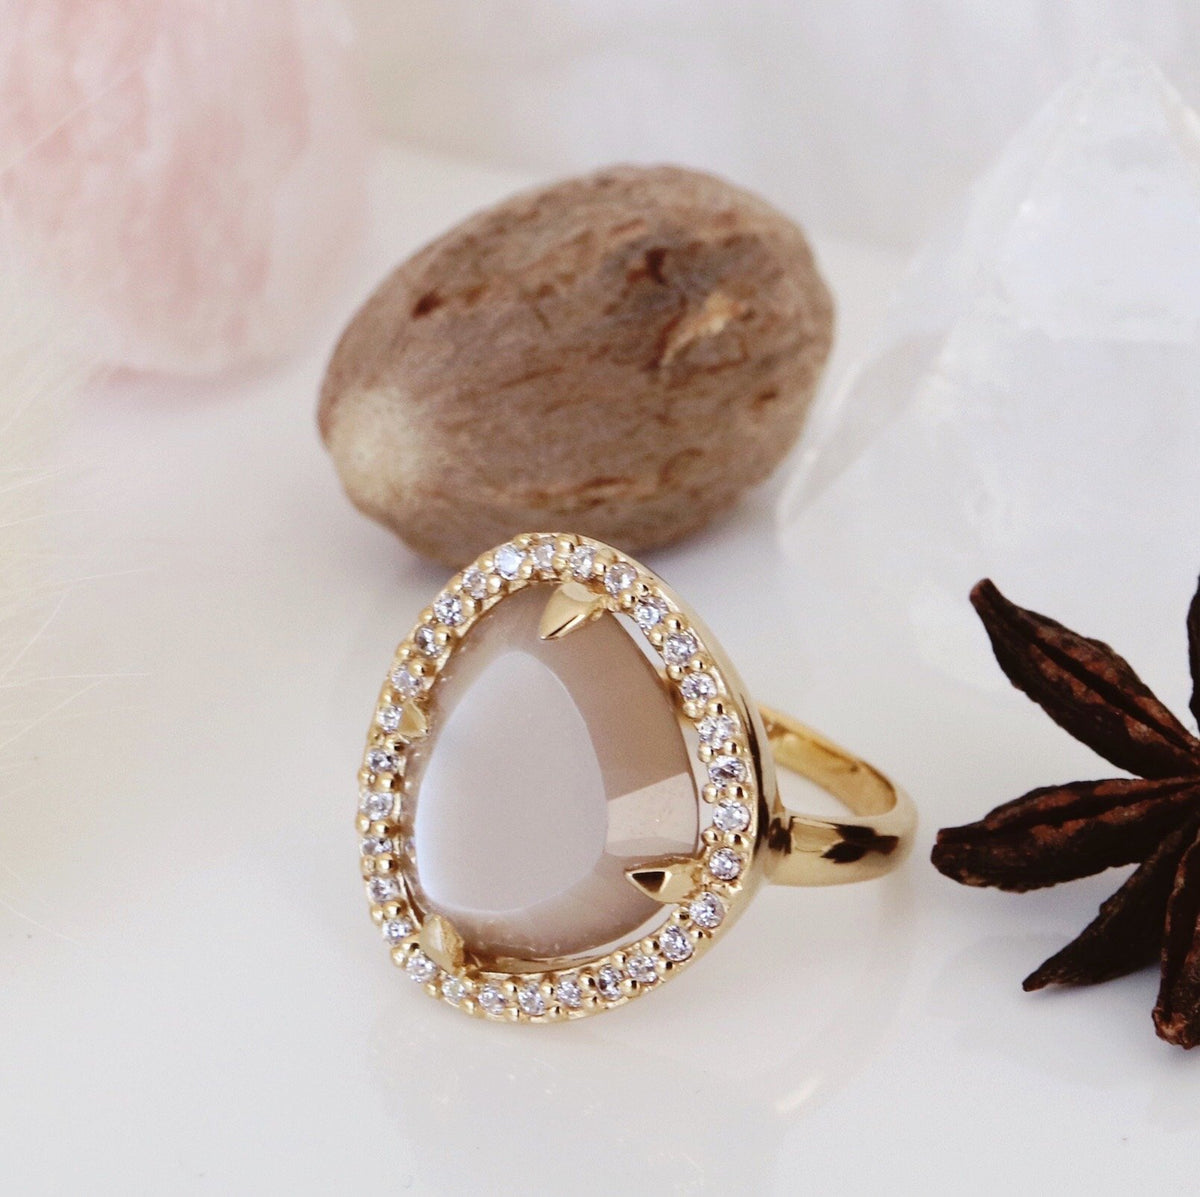 DREAM LUNA COCKTAIL RING - CHAI MOONSTONE, CUBIC ZIRCONIA &amp; GOLD - LIMITED EDITION - SO PRETTY CARA COTTER